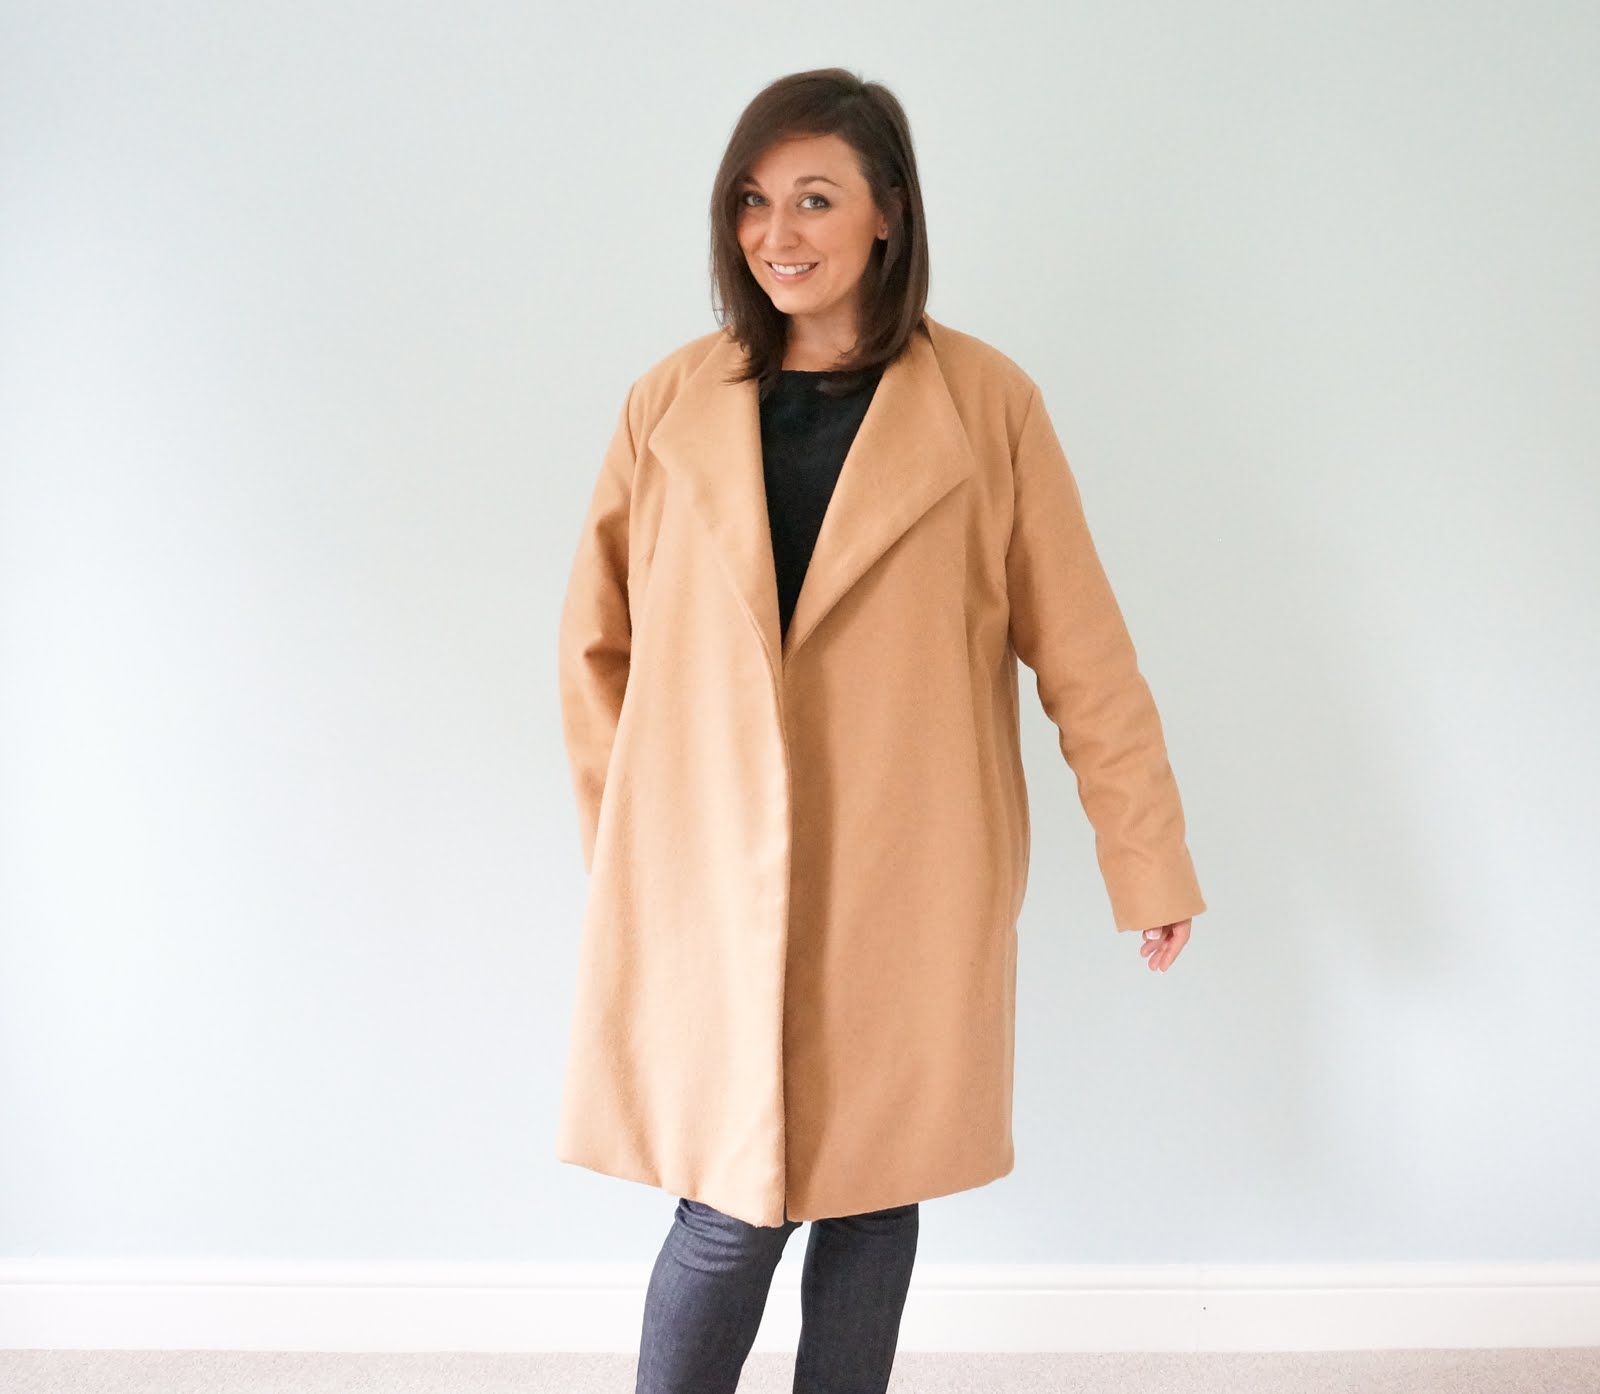 Burda 6736 Coat review by the petite passions